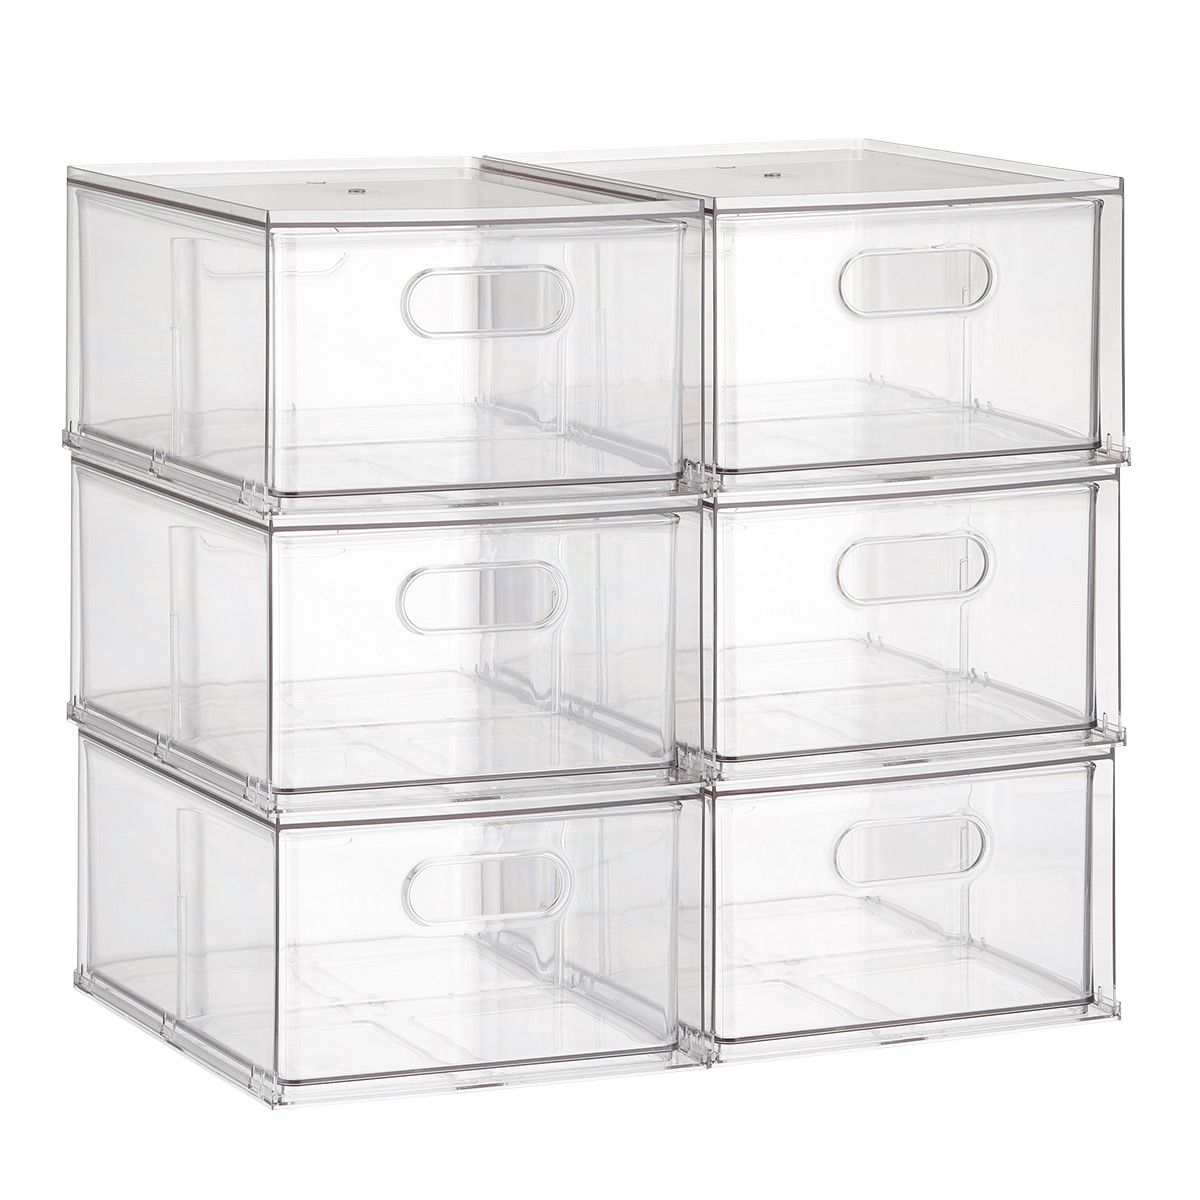 Case of 6 T.H.E. Stackable Drawer Clear | The Container Store